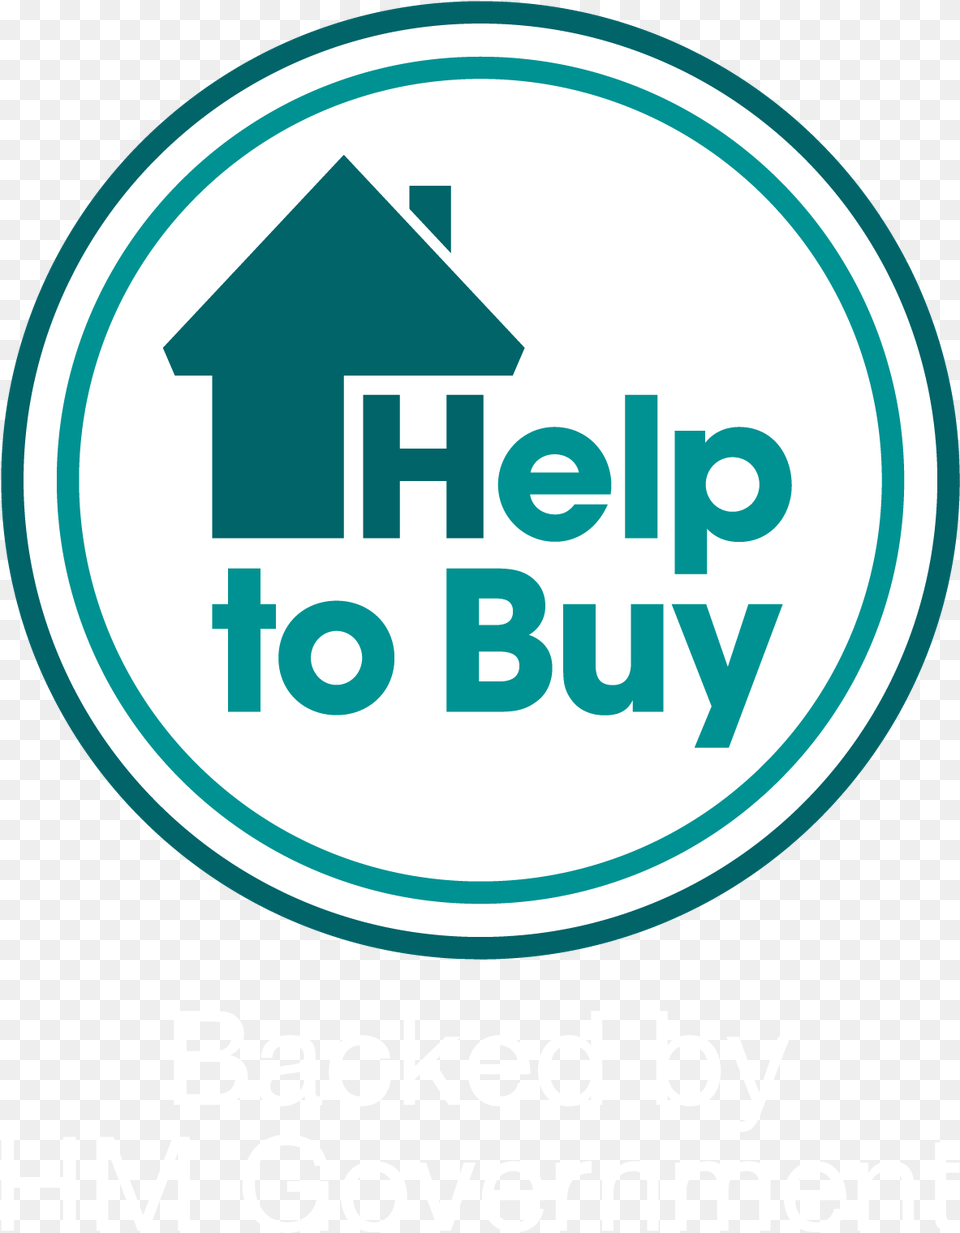 Help To Buy Scheme, Logo, Disk Png Image